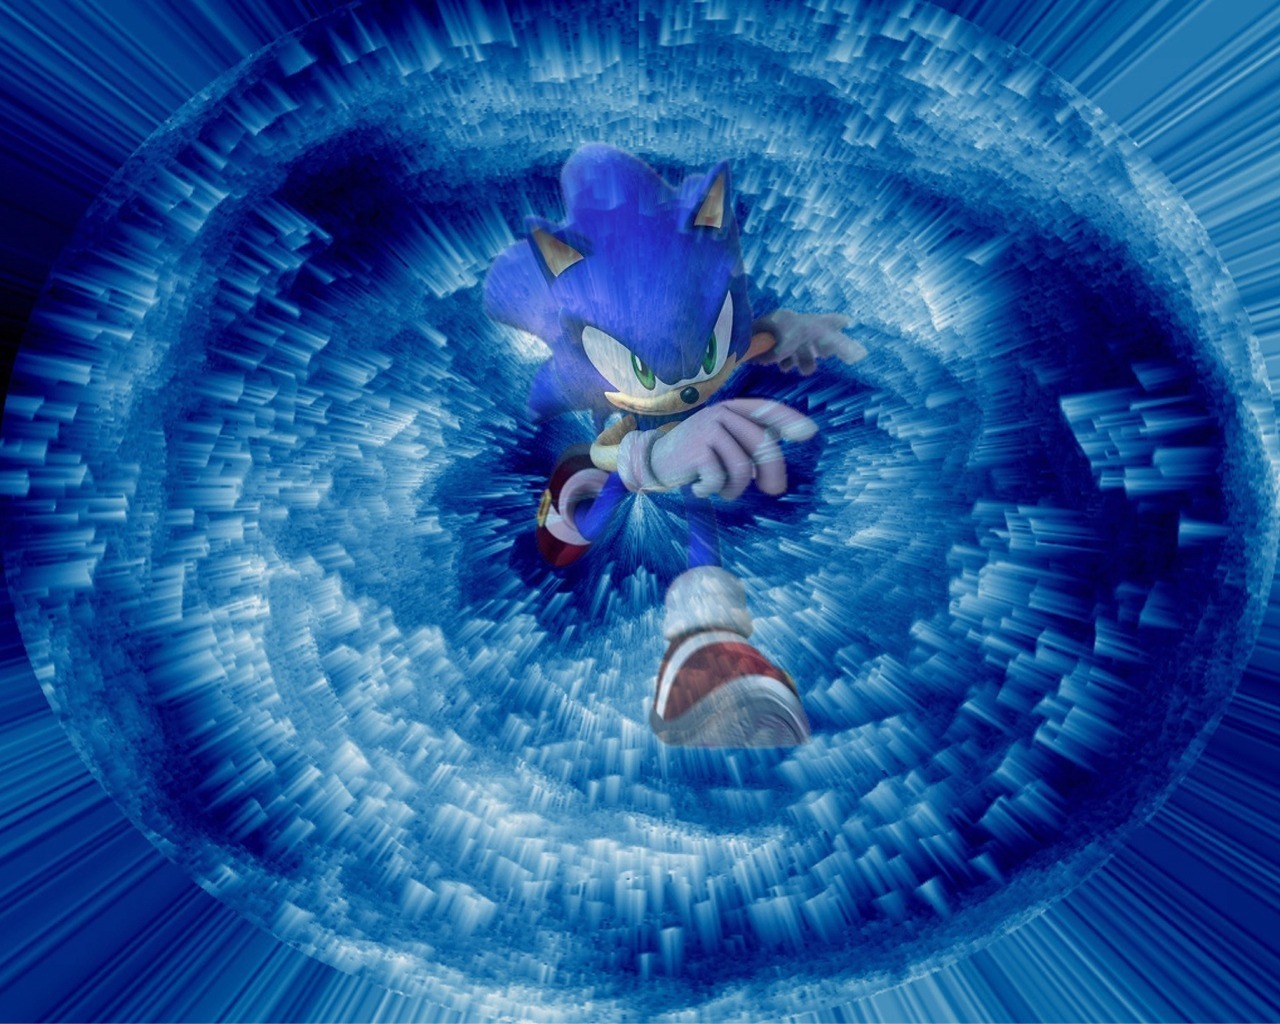 Sonic wallpapers - Sonic the Hedgehog 1280x1024